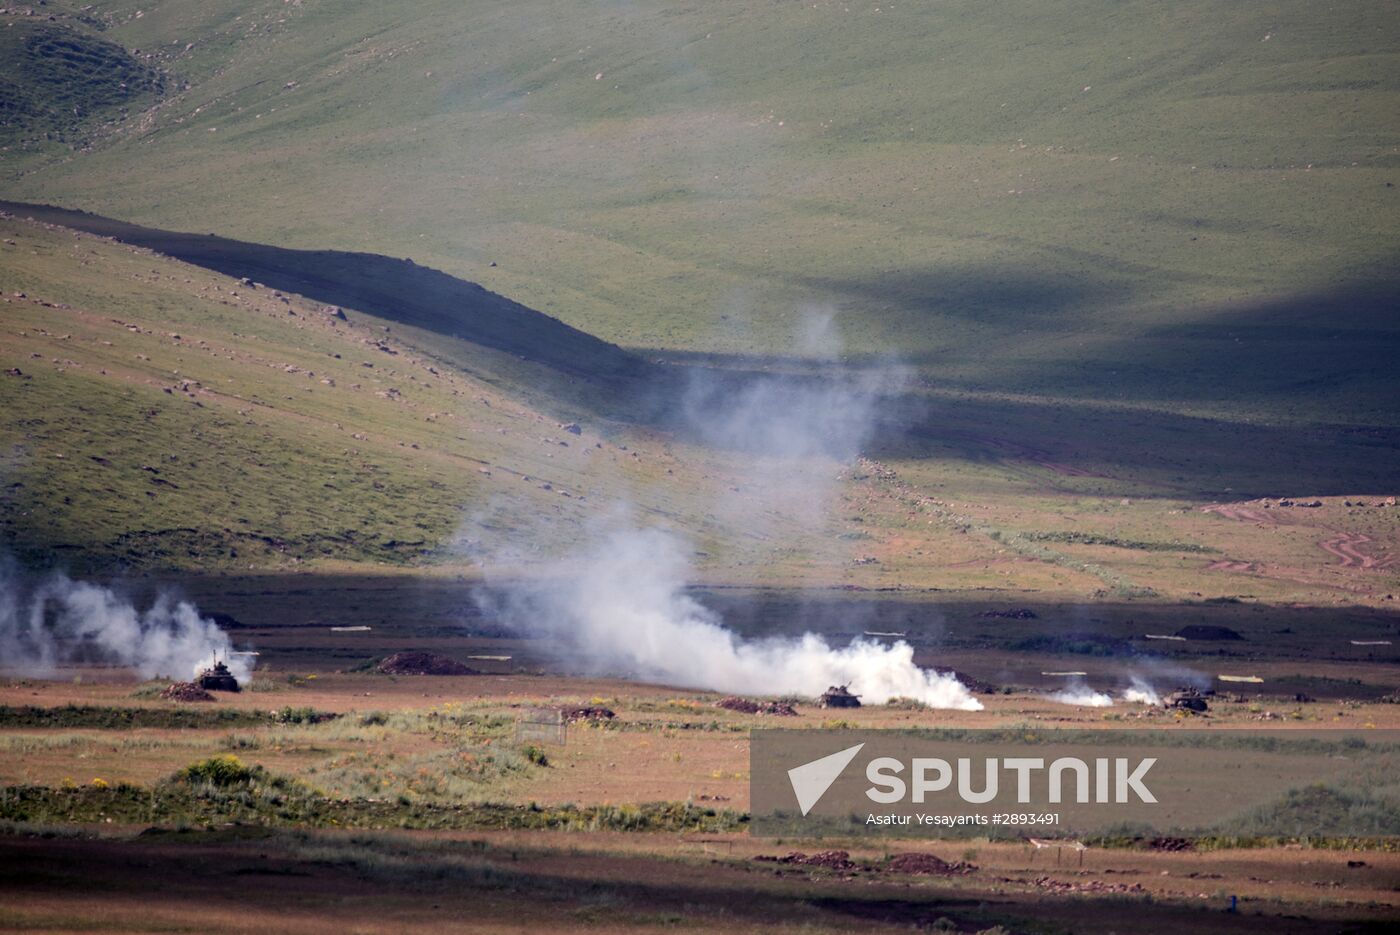 Military exercise at Alagyaz base in Armenia